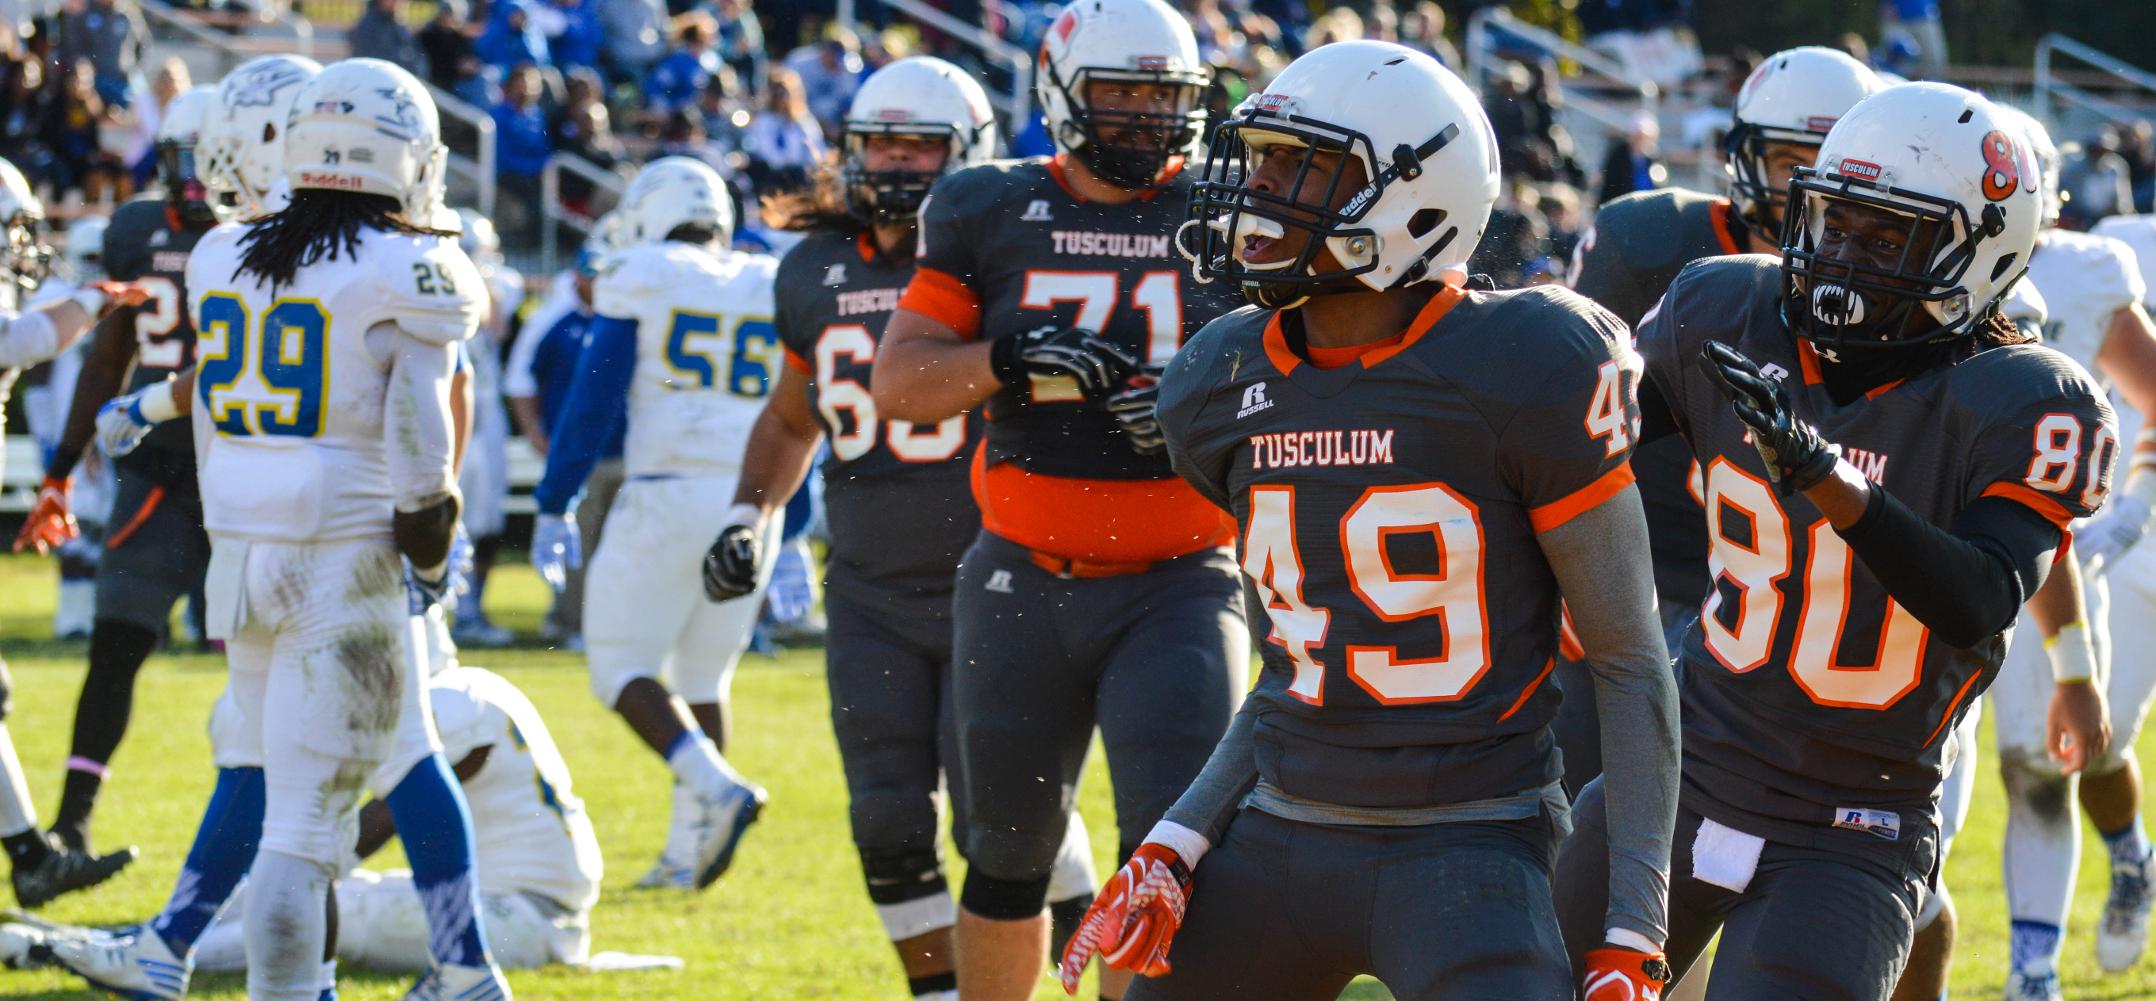 Tusculum surges in second half to defeat Limestone, 34-13